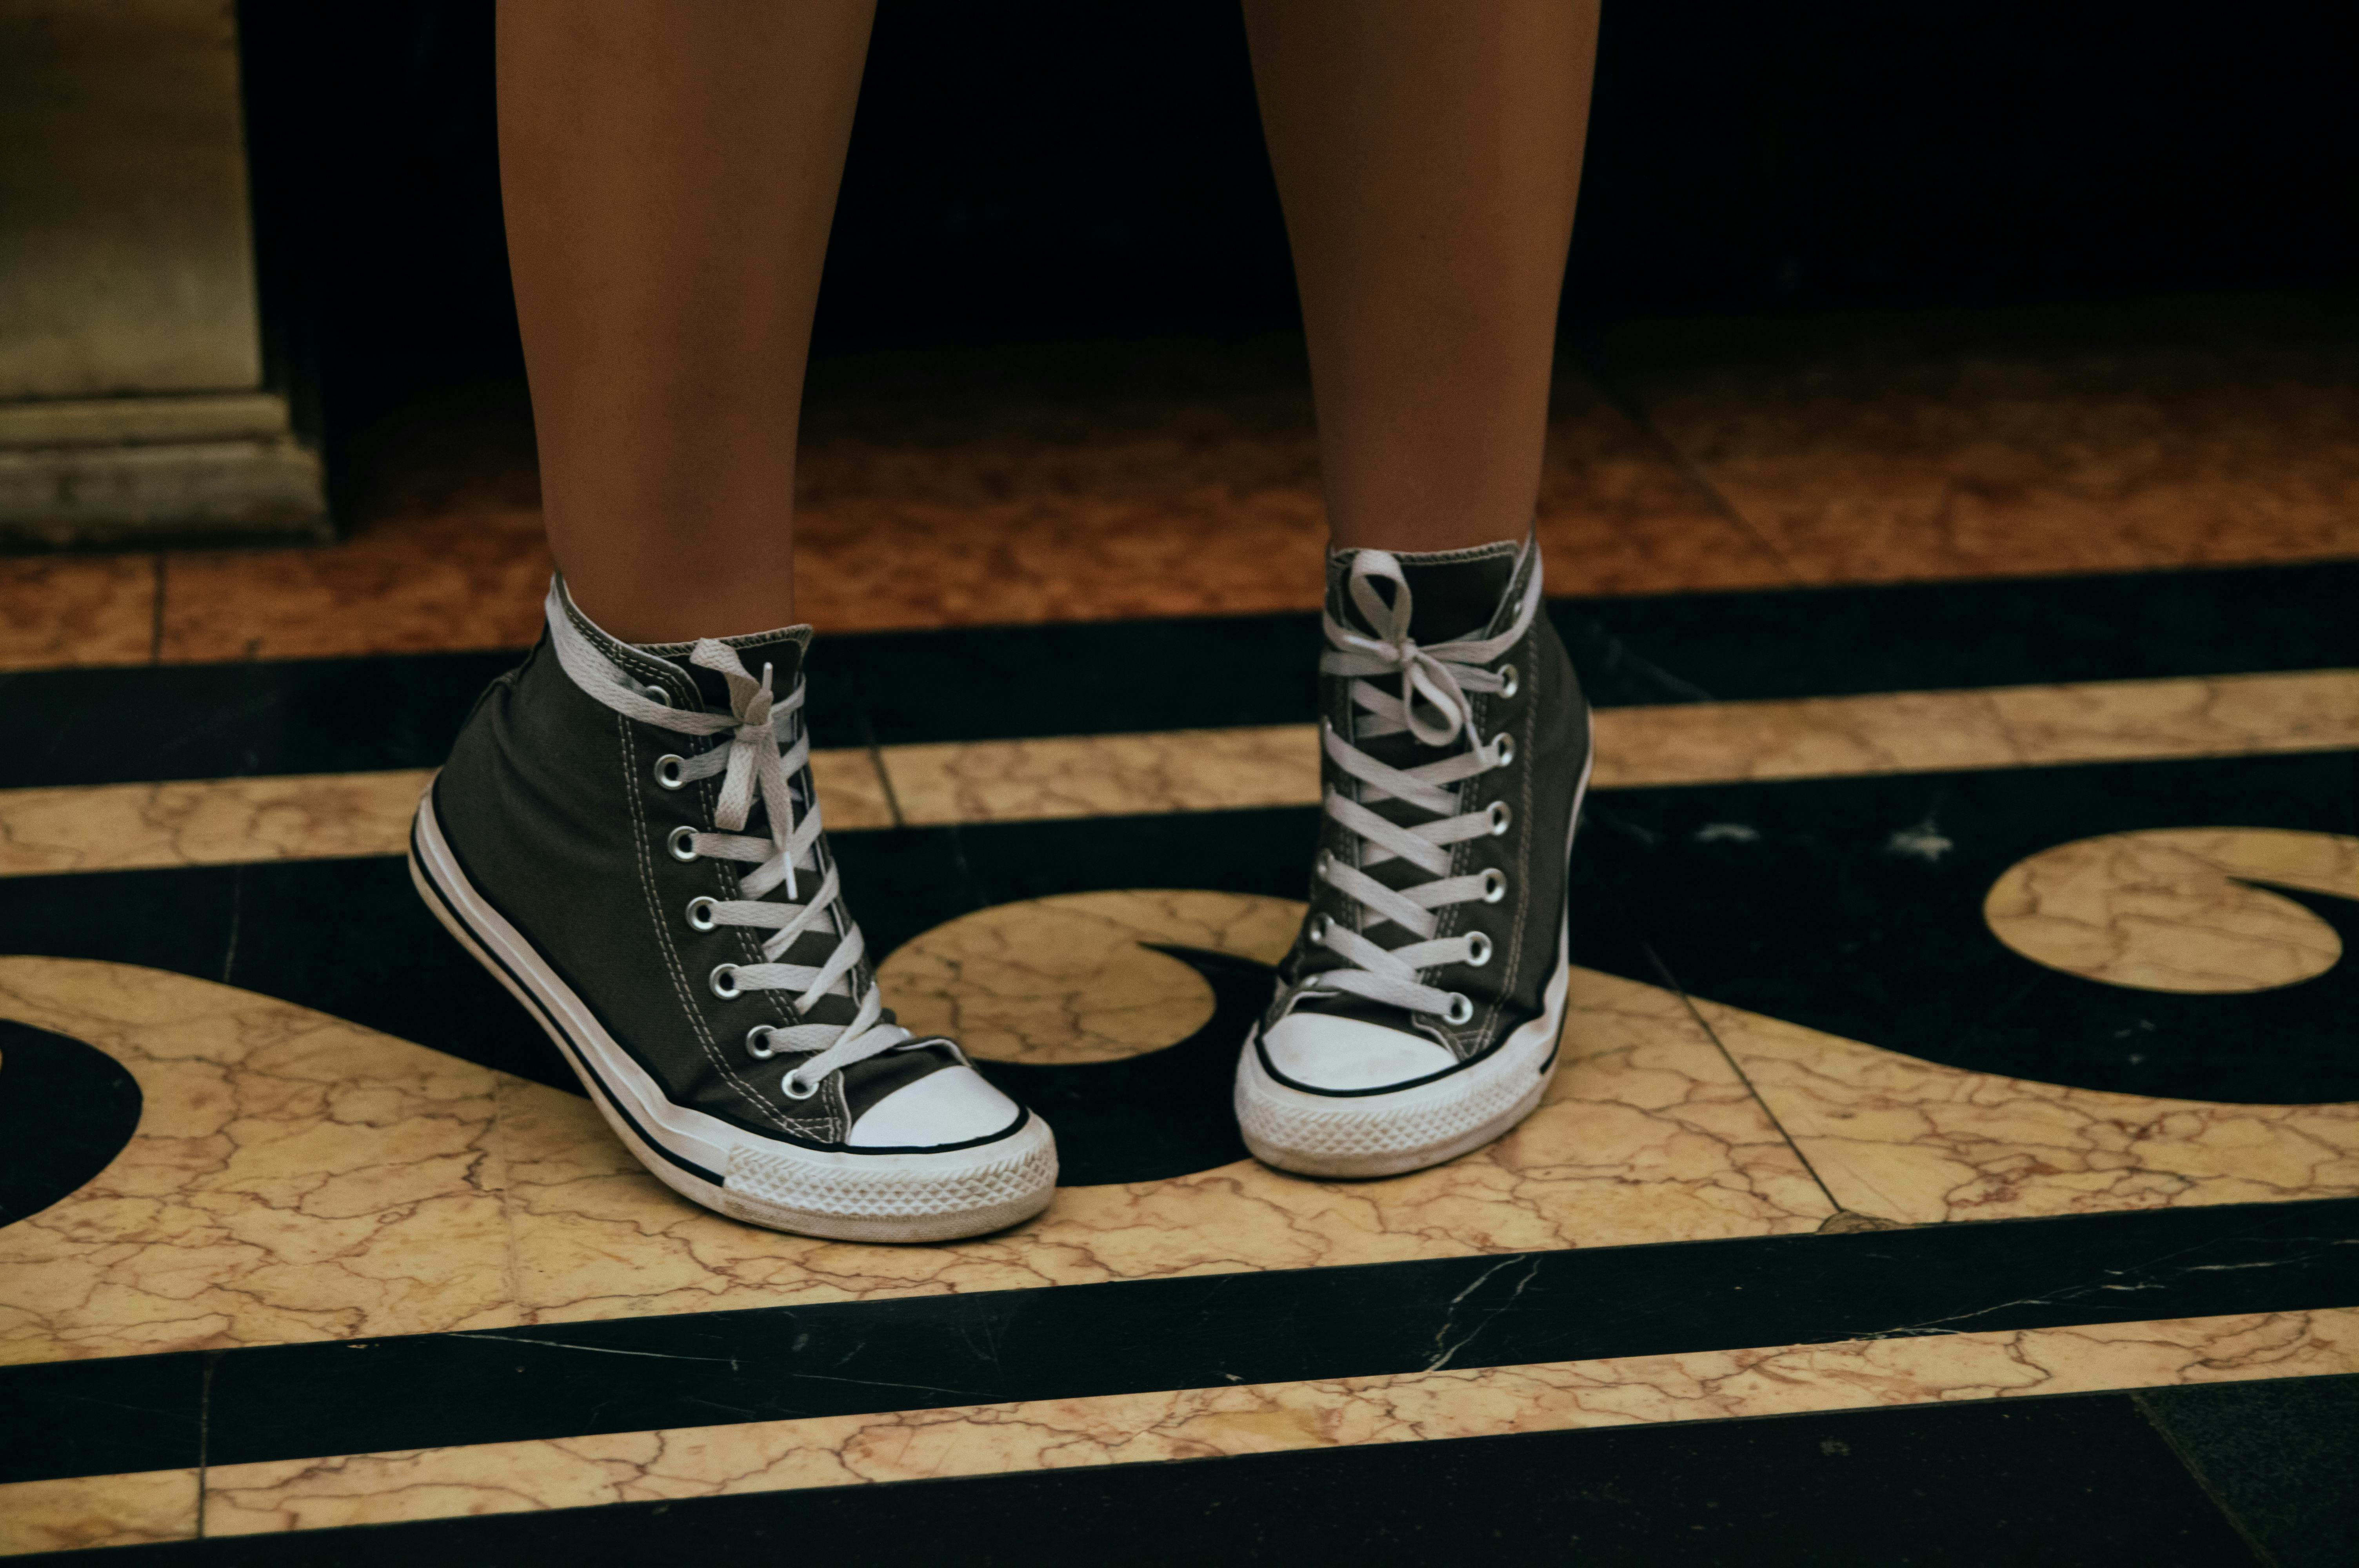 Person in Brown Pants Wearing White Converse All Star High Top Sneakers ·  Free Stock Photo